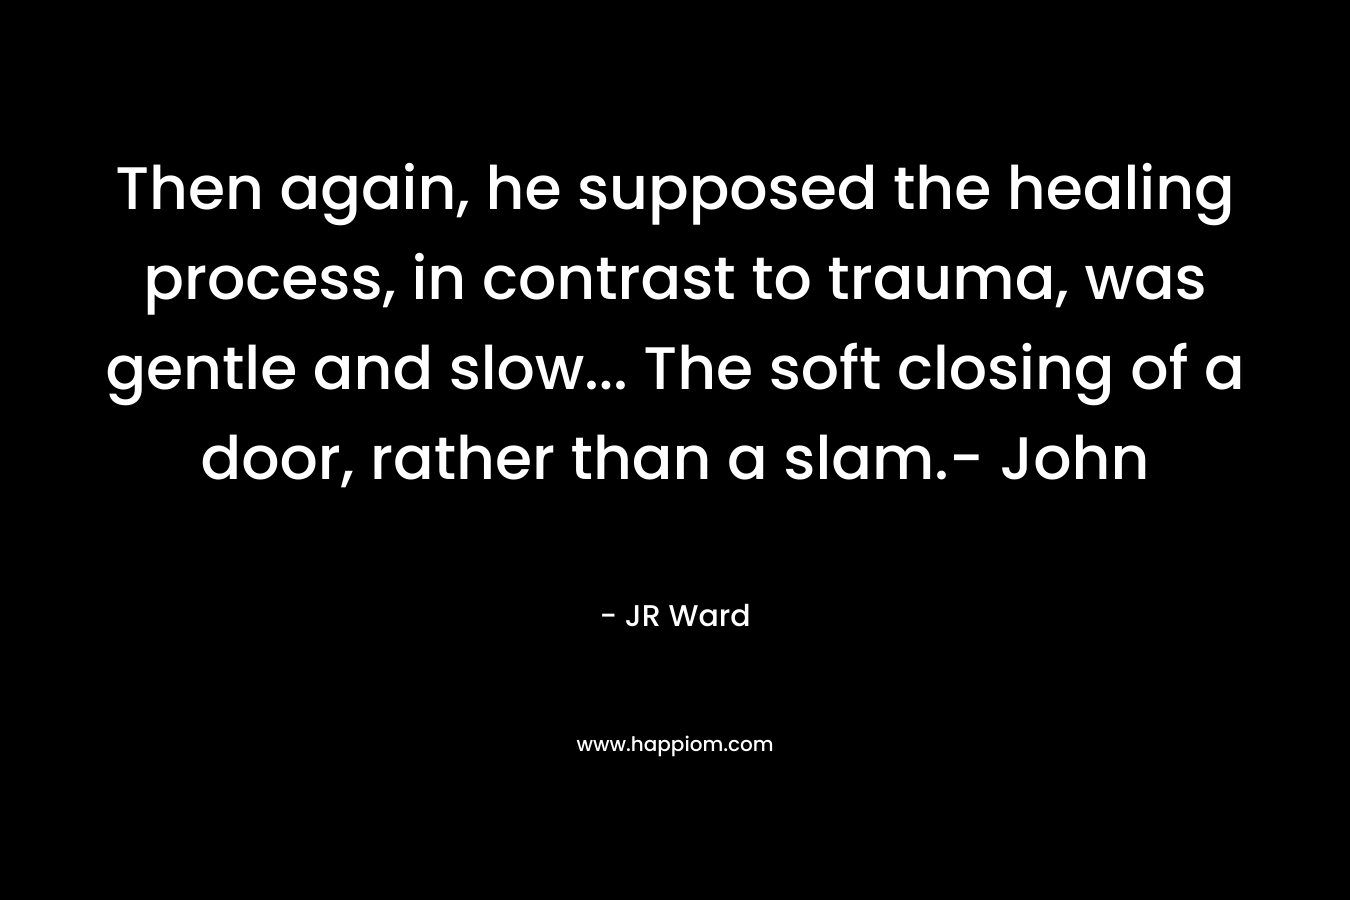 Then again, he supposed the healing process, in contrast to trauma, was gentle and slow... The soft closing of a door, rather than a slam.- John